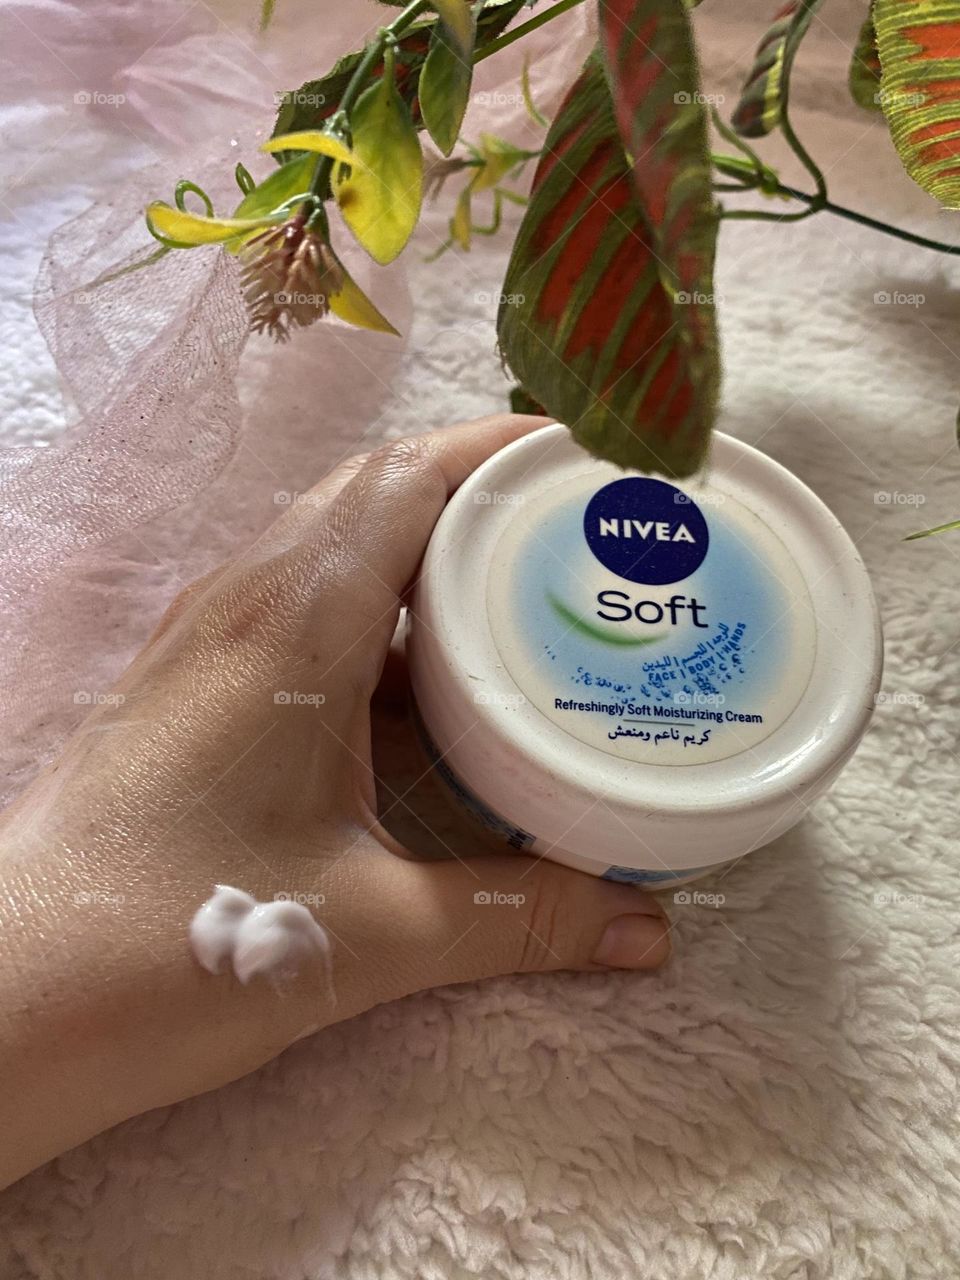 One of the best products I’ve ever tried is Nivea soft cream